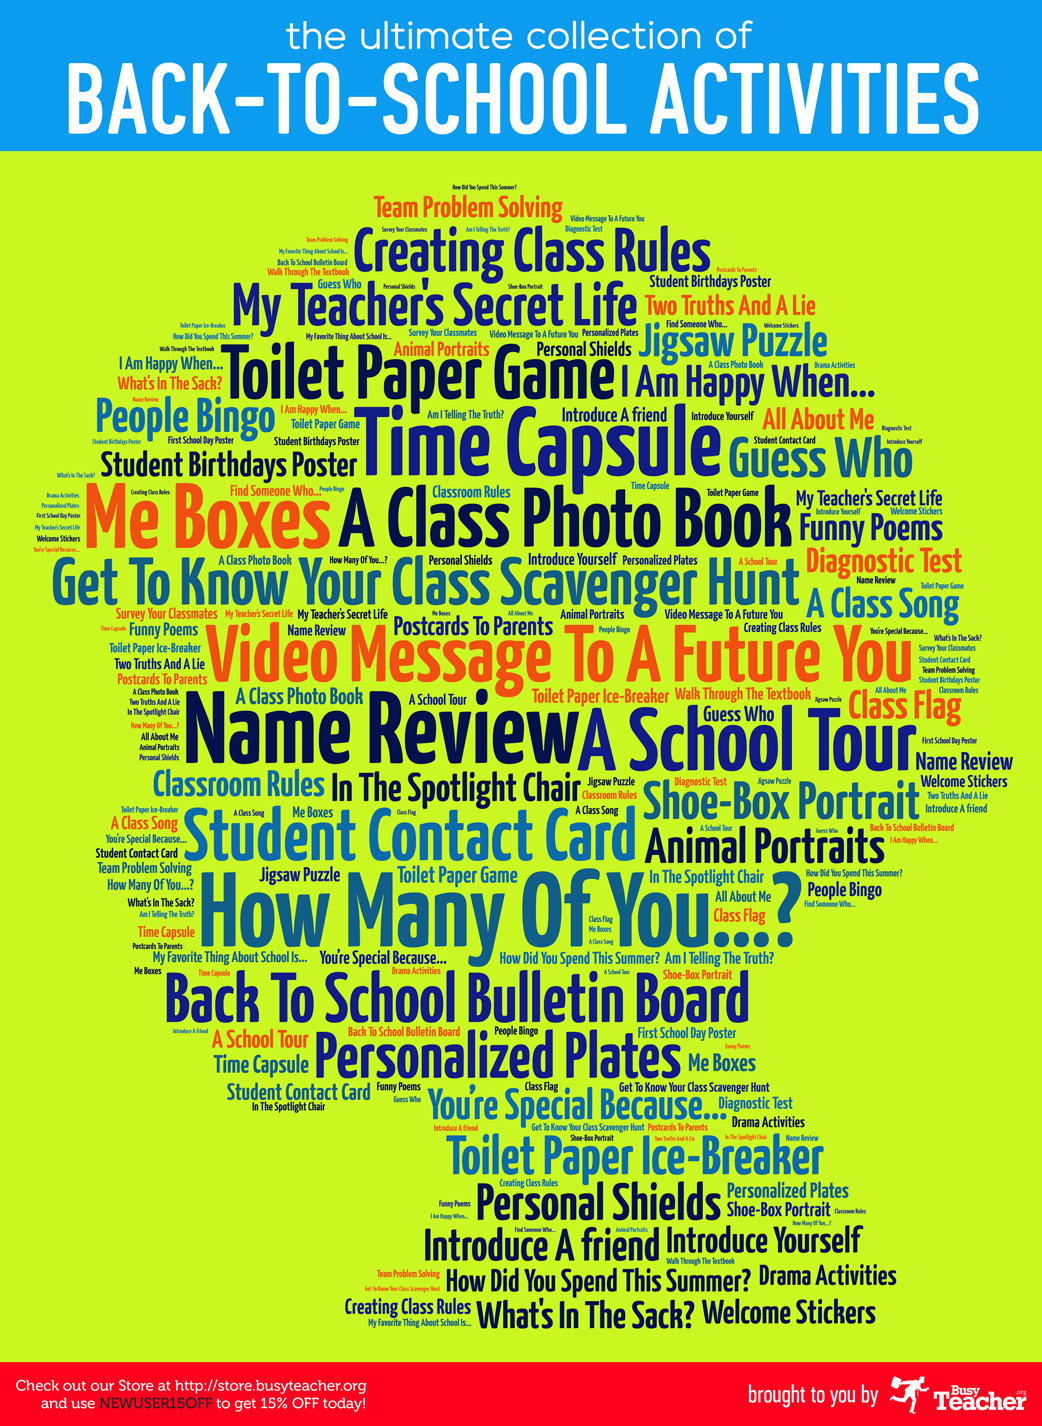 The Ultimate Collection of Back to School Activities: Poster